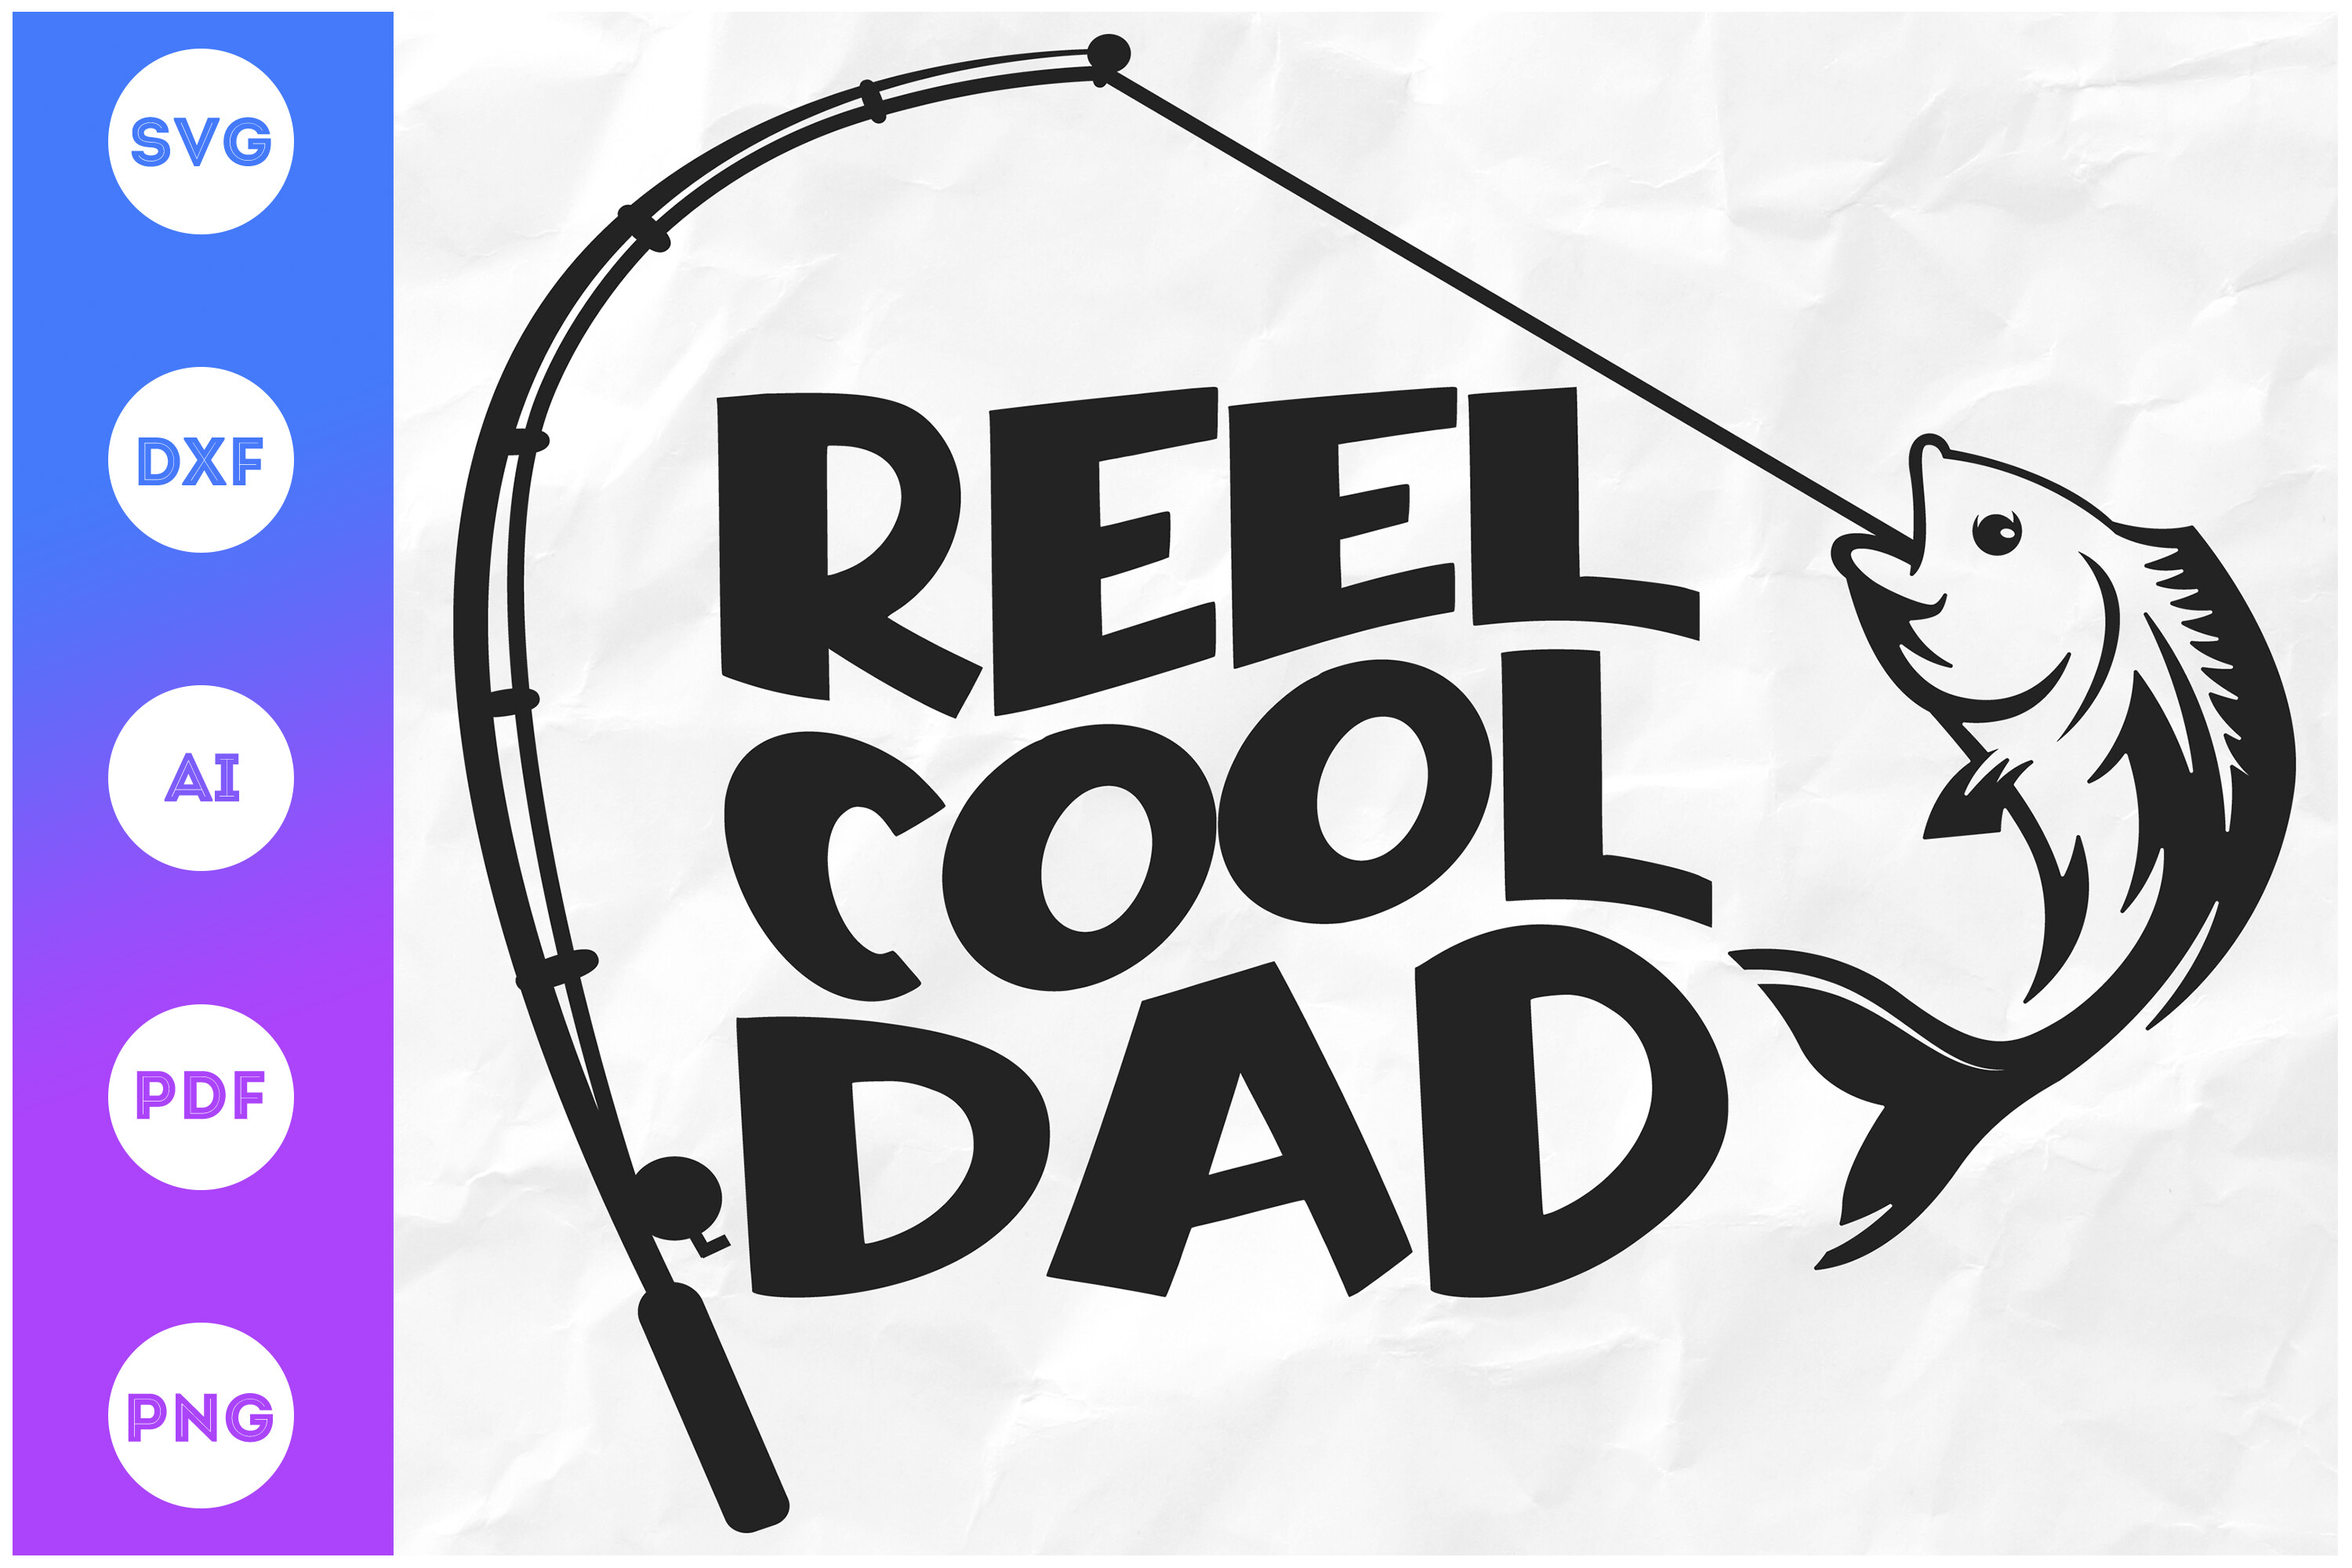 Reel Cool Dad SVG  Fishing SVG Graphic by craftiversally · Creative Fabrica